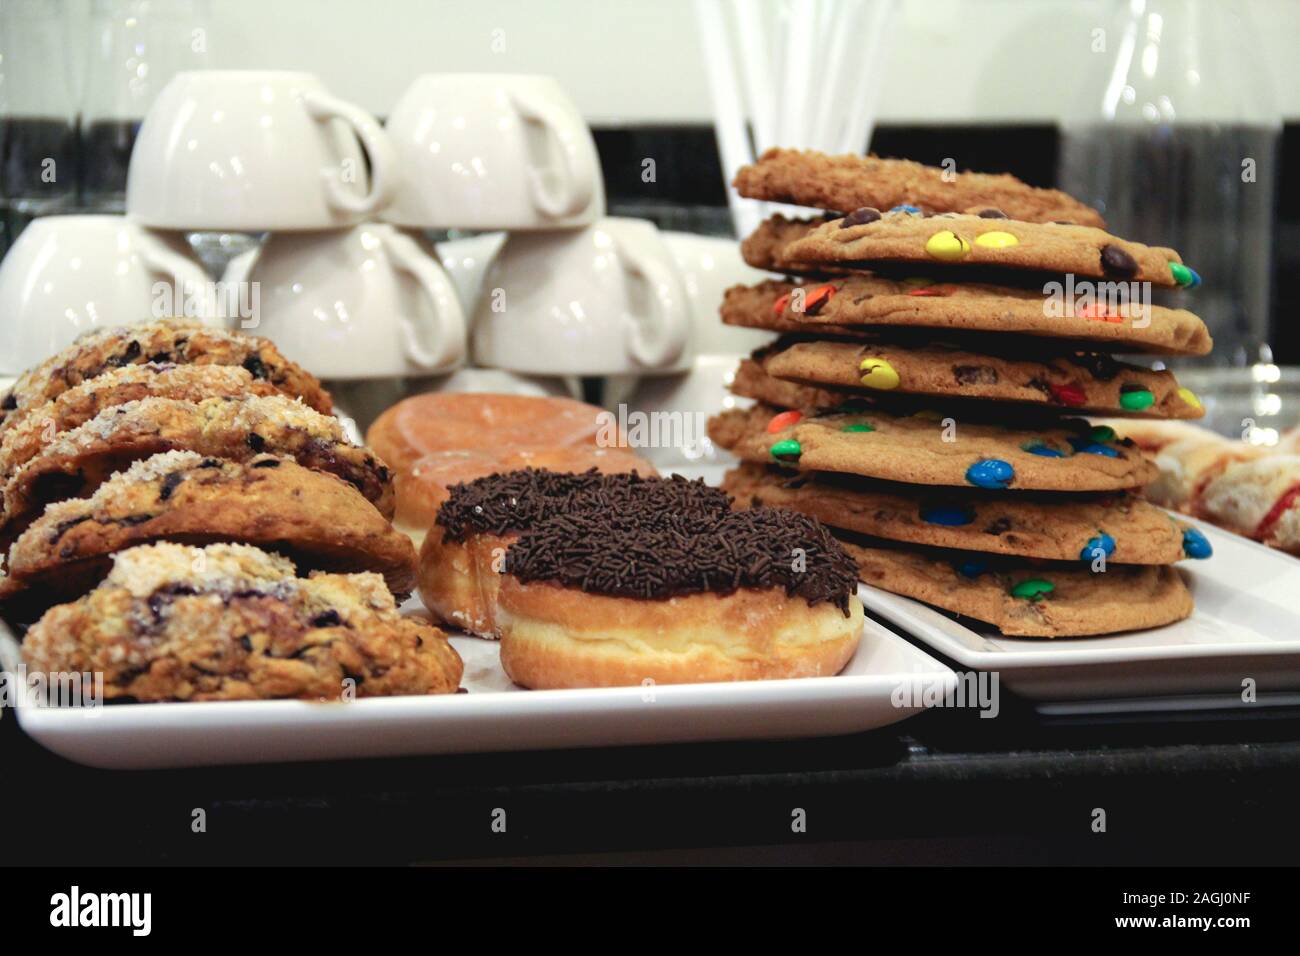 Scones, donuts, and cookies stacked in front of mugs in a coffeeshop Stock Photo